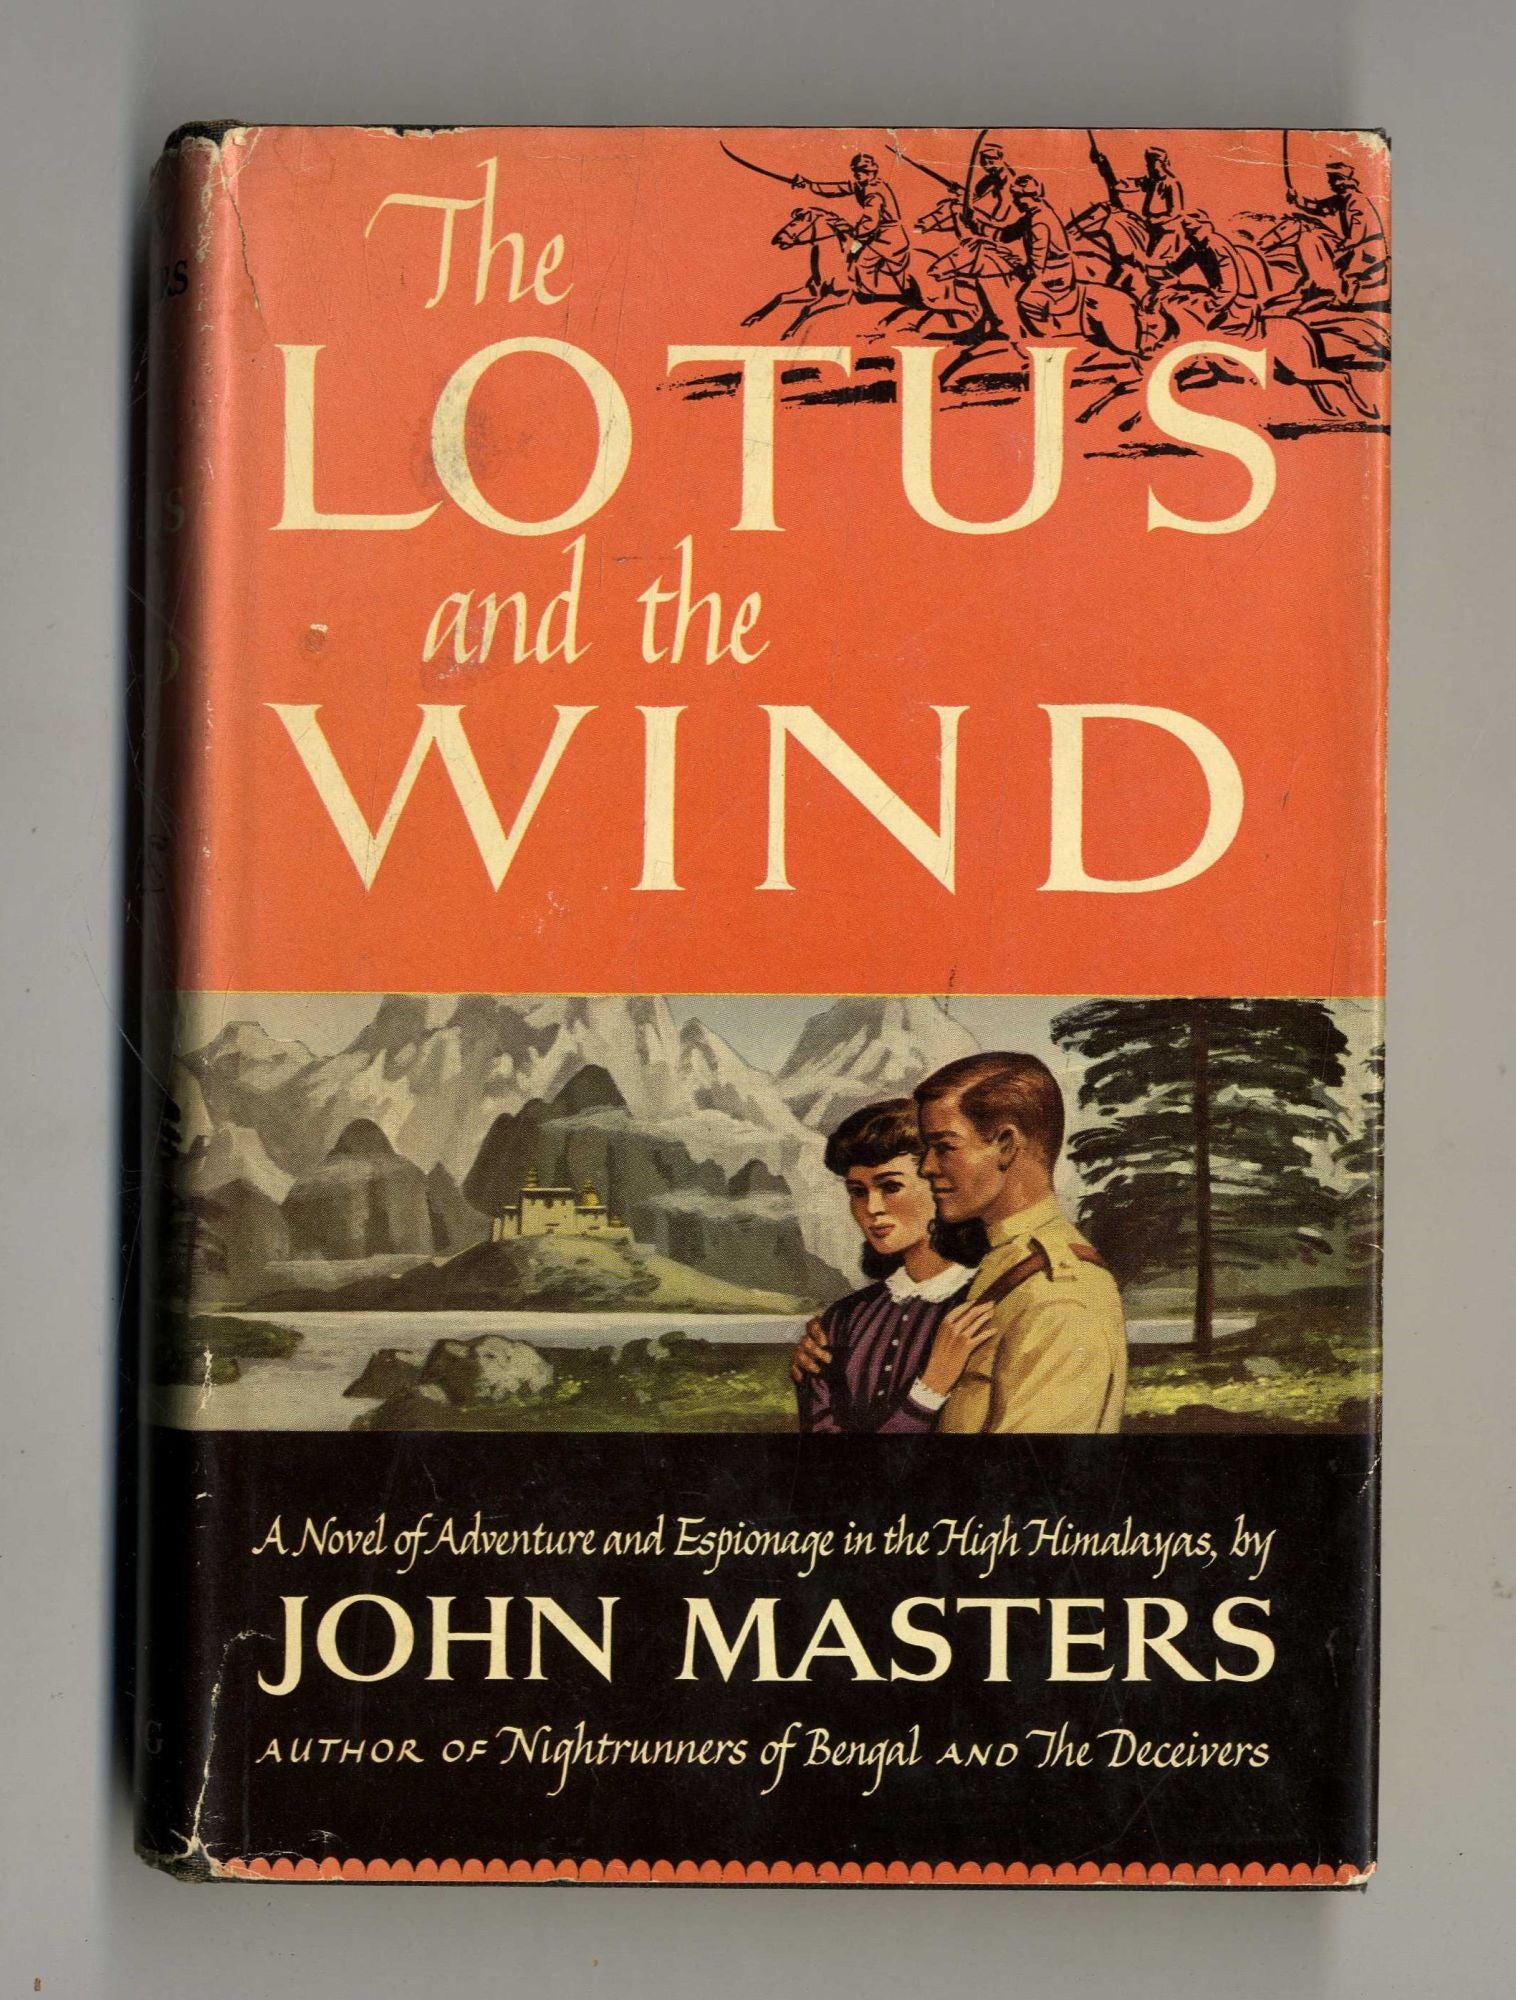 Book #160216 The Lotus and the Wind. John Masters.